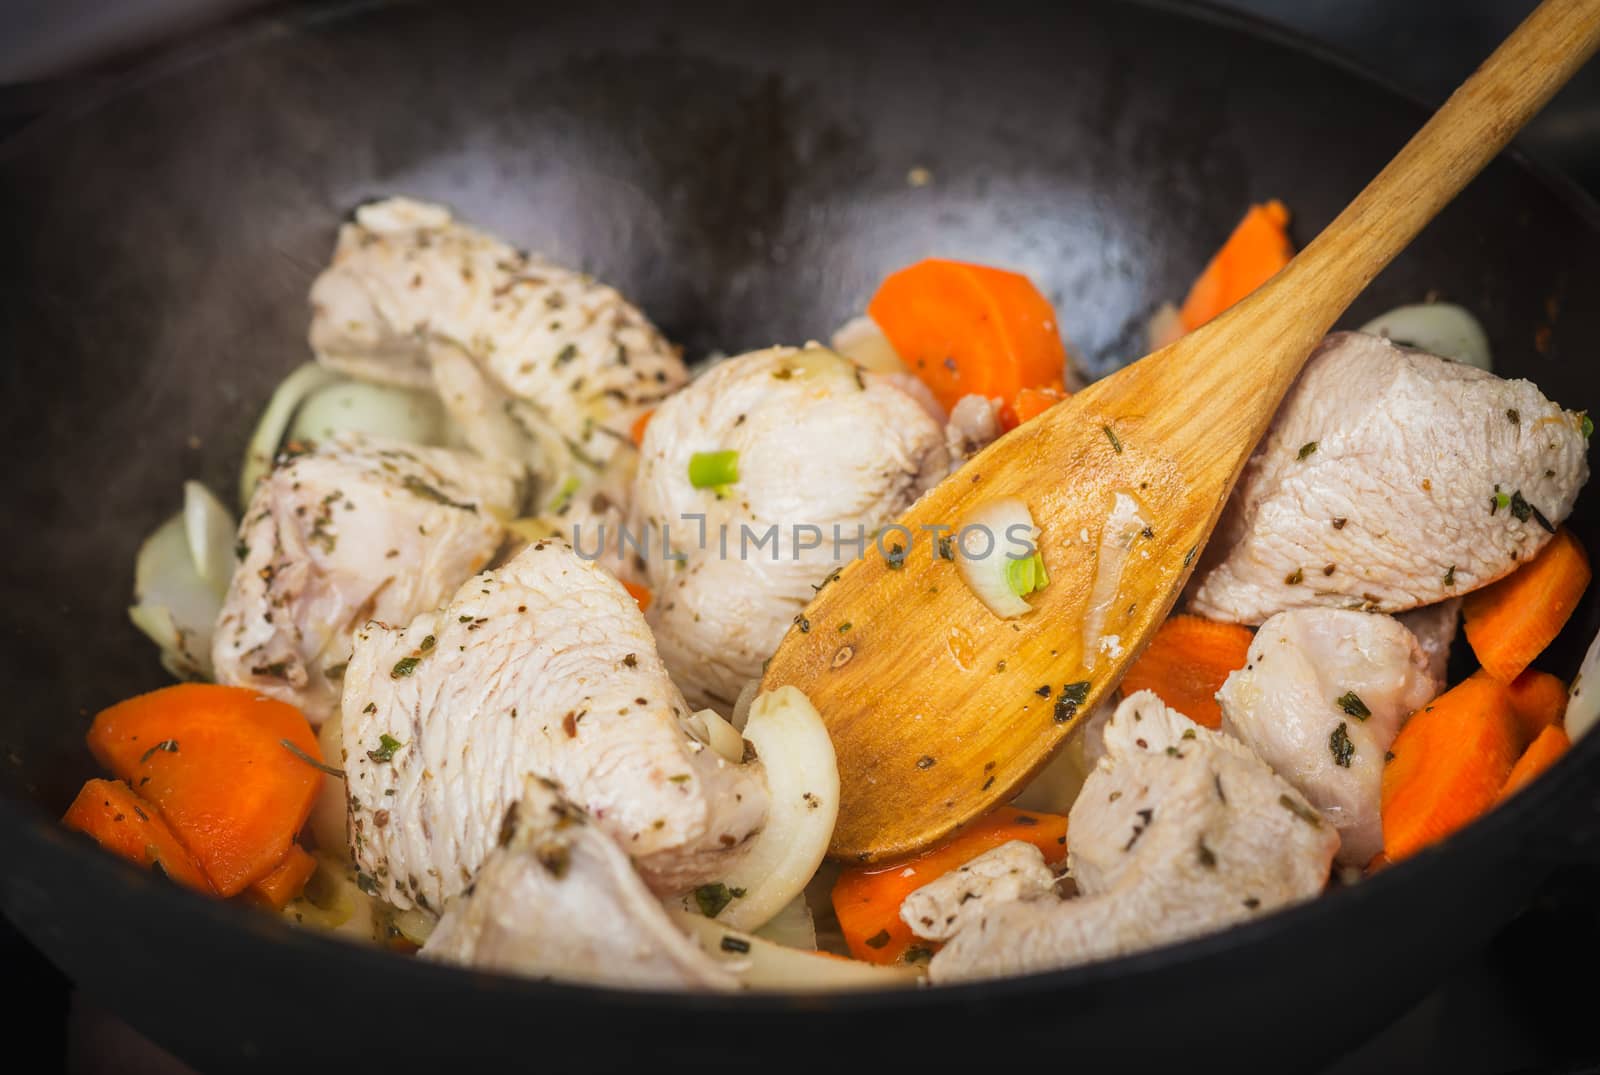 Cooking turkey with vegetables and spices in a frying pan fried minced raw turkey into pieces, chopped carrots, onions and dried herbs, wooden spoon mixing meat